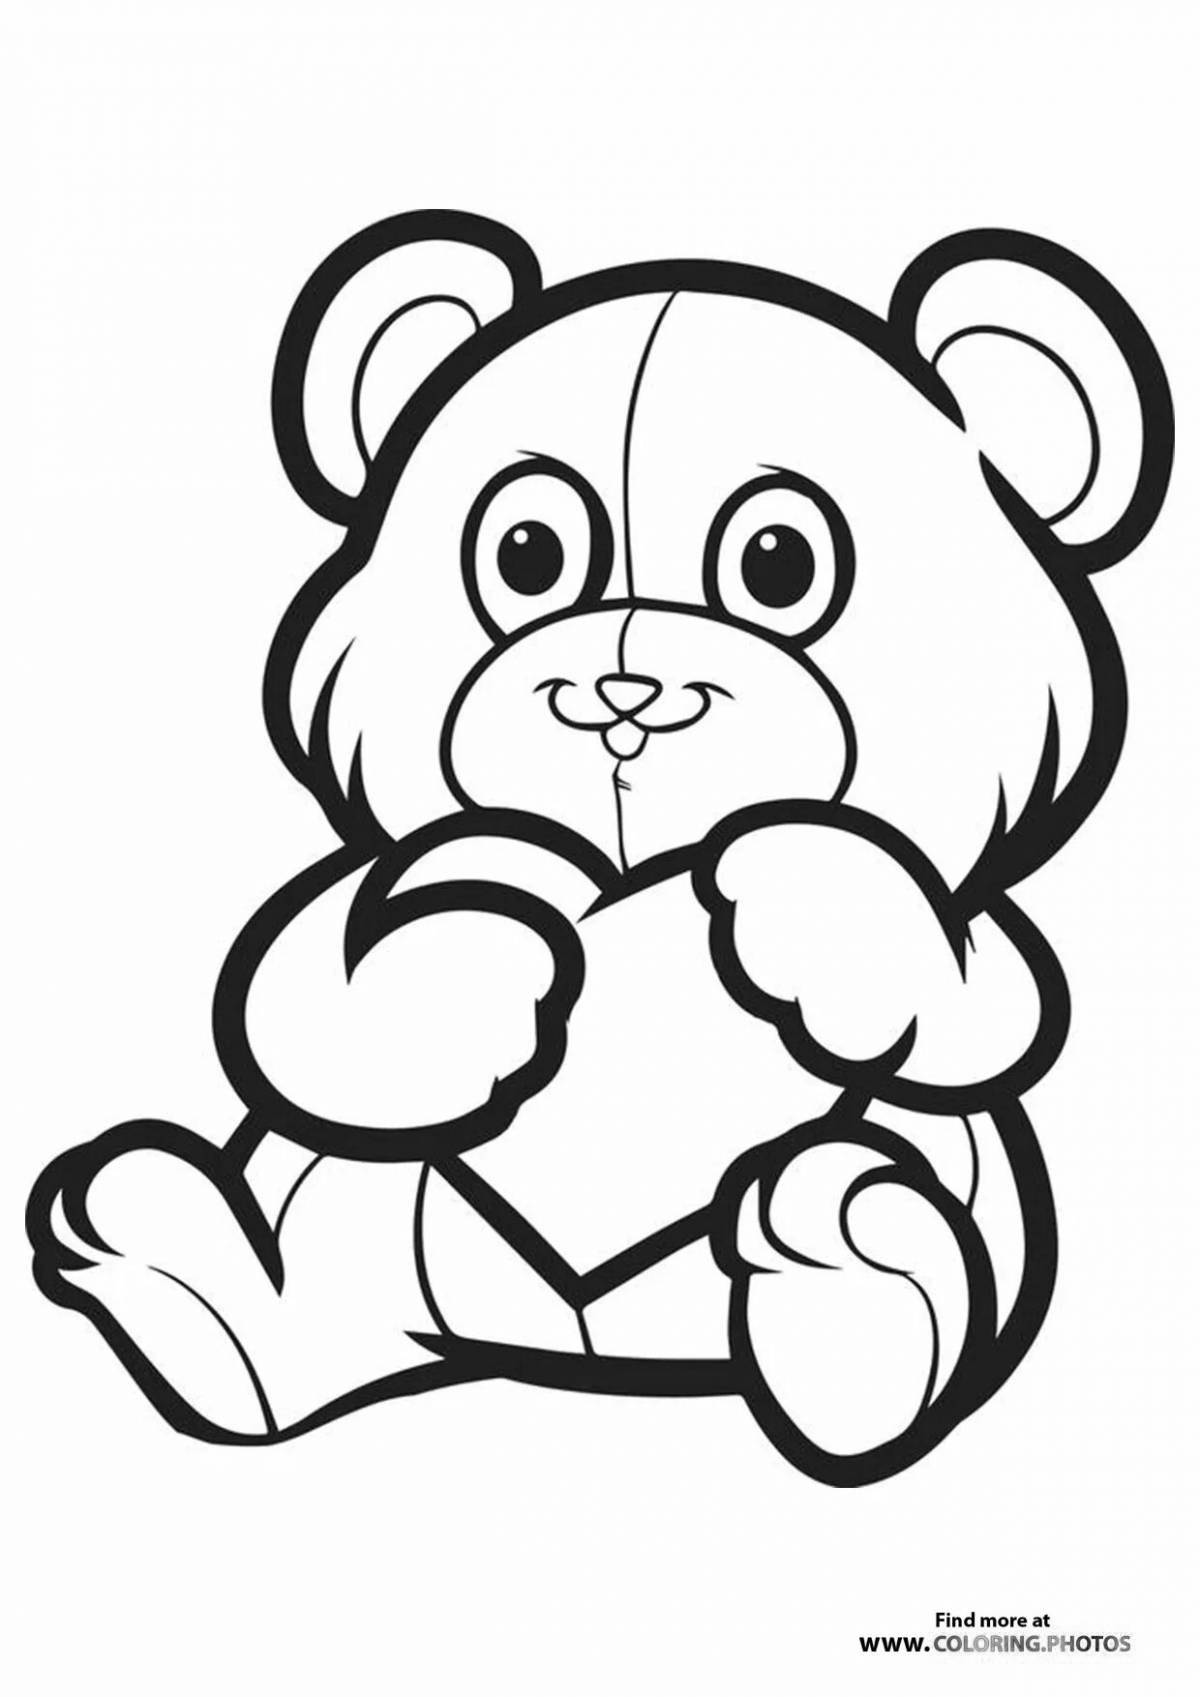 Colorful cute teddy bear coloring book